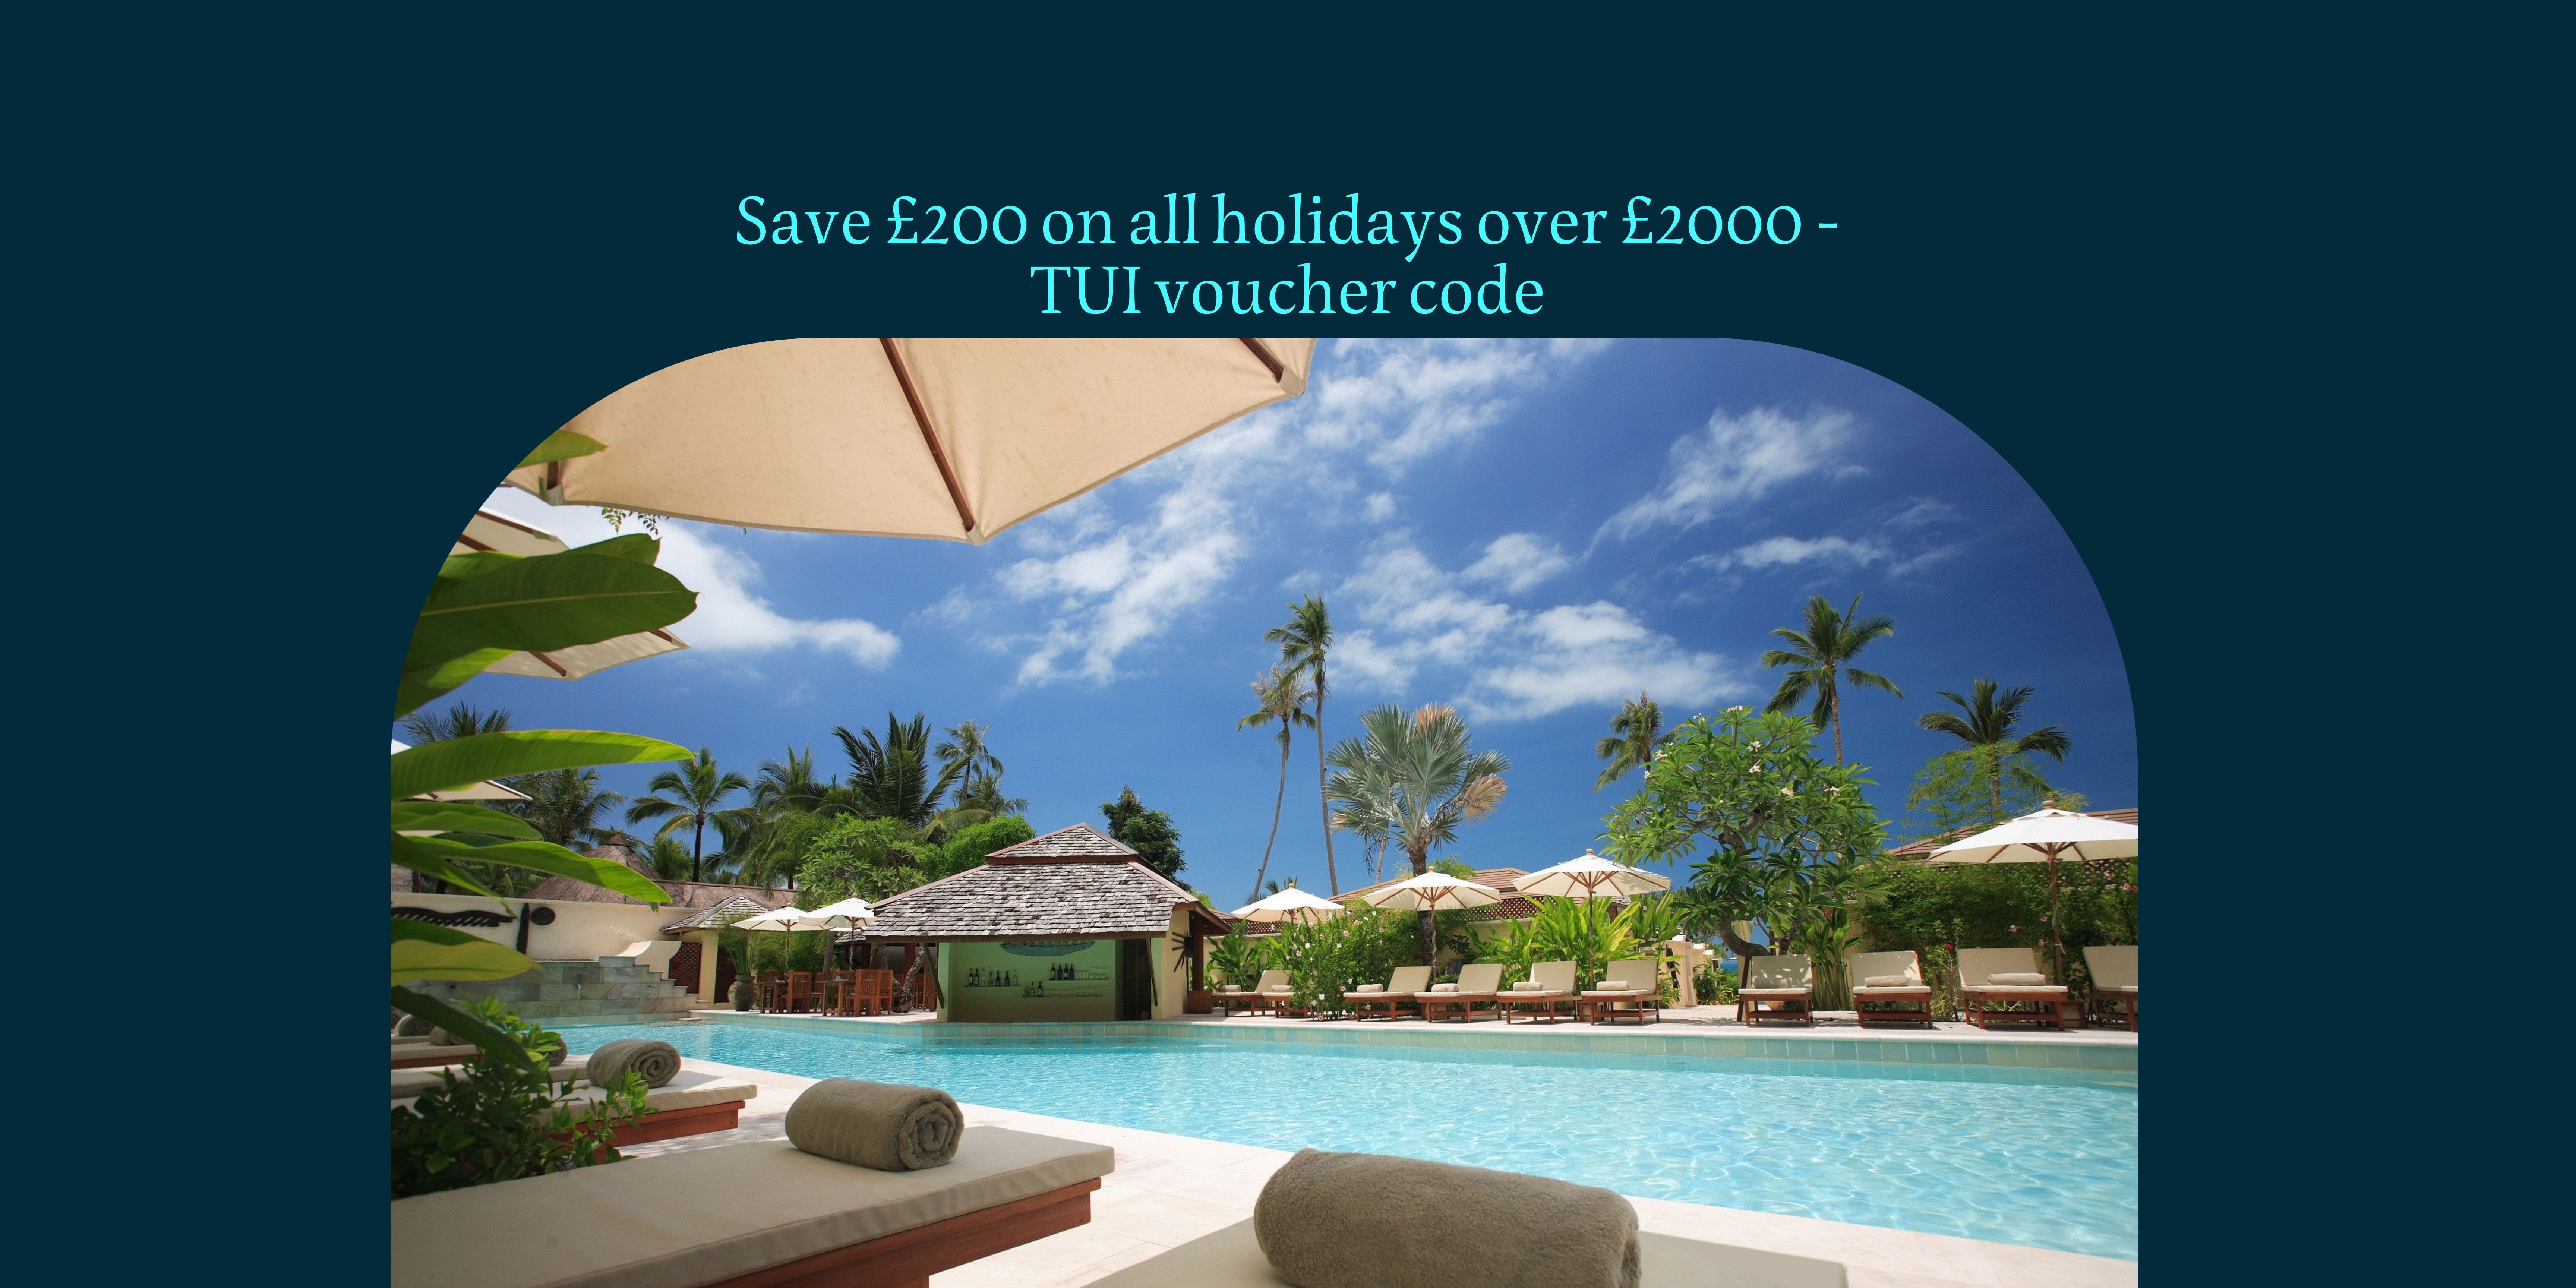 Save £200 on all holidays over £2000 - TUI voucher code